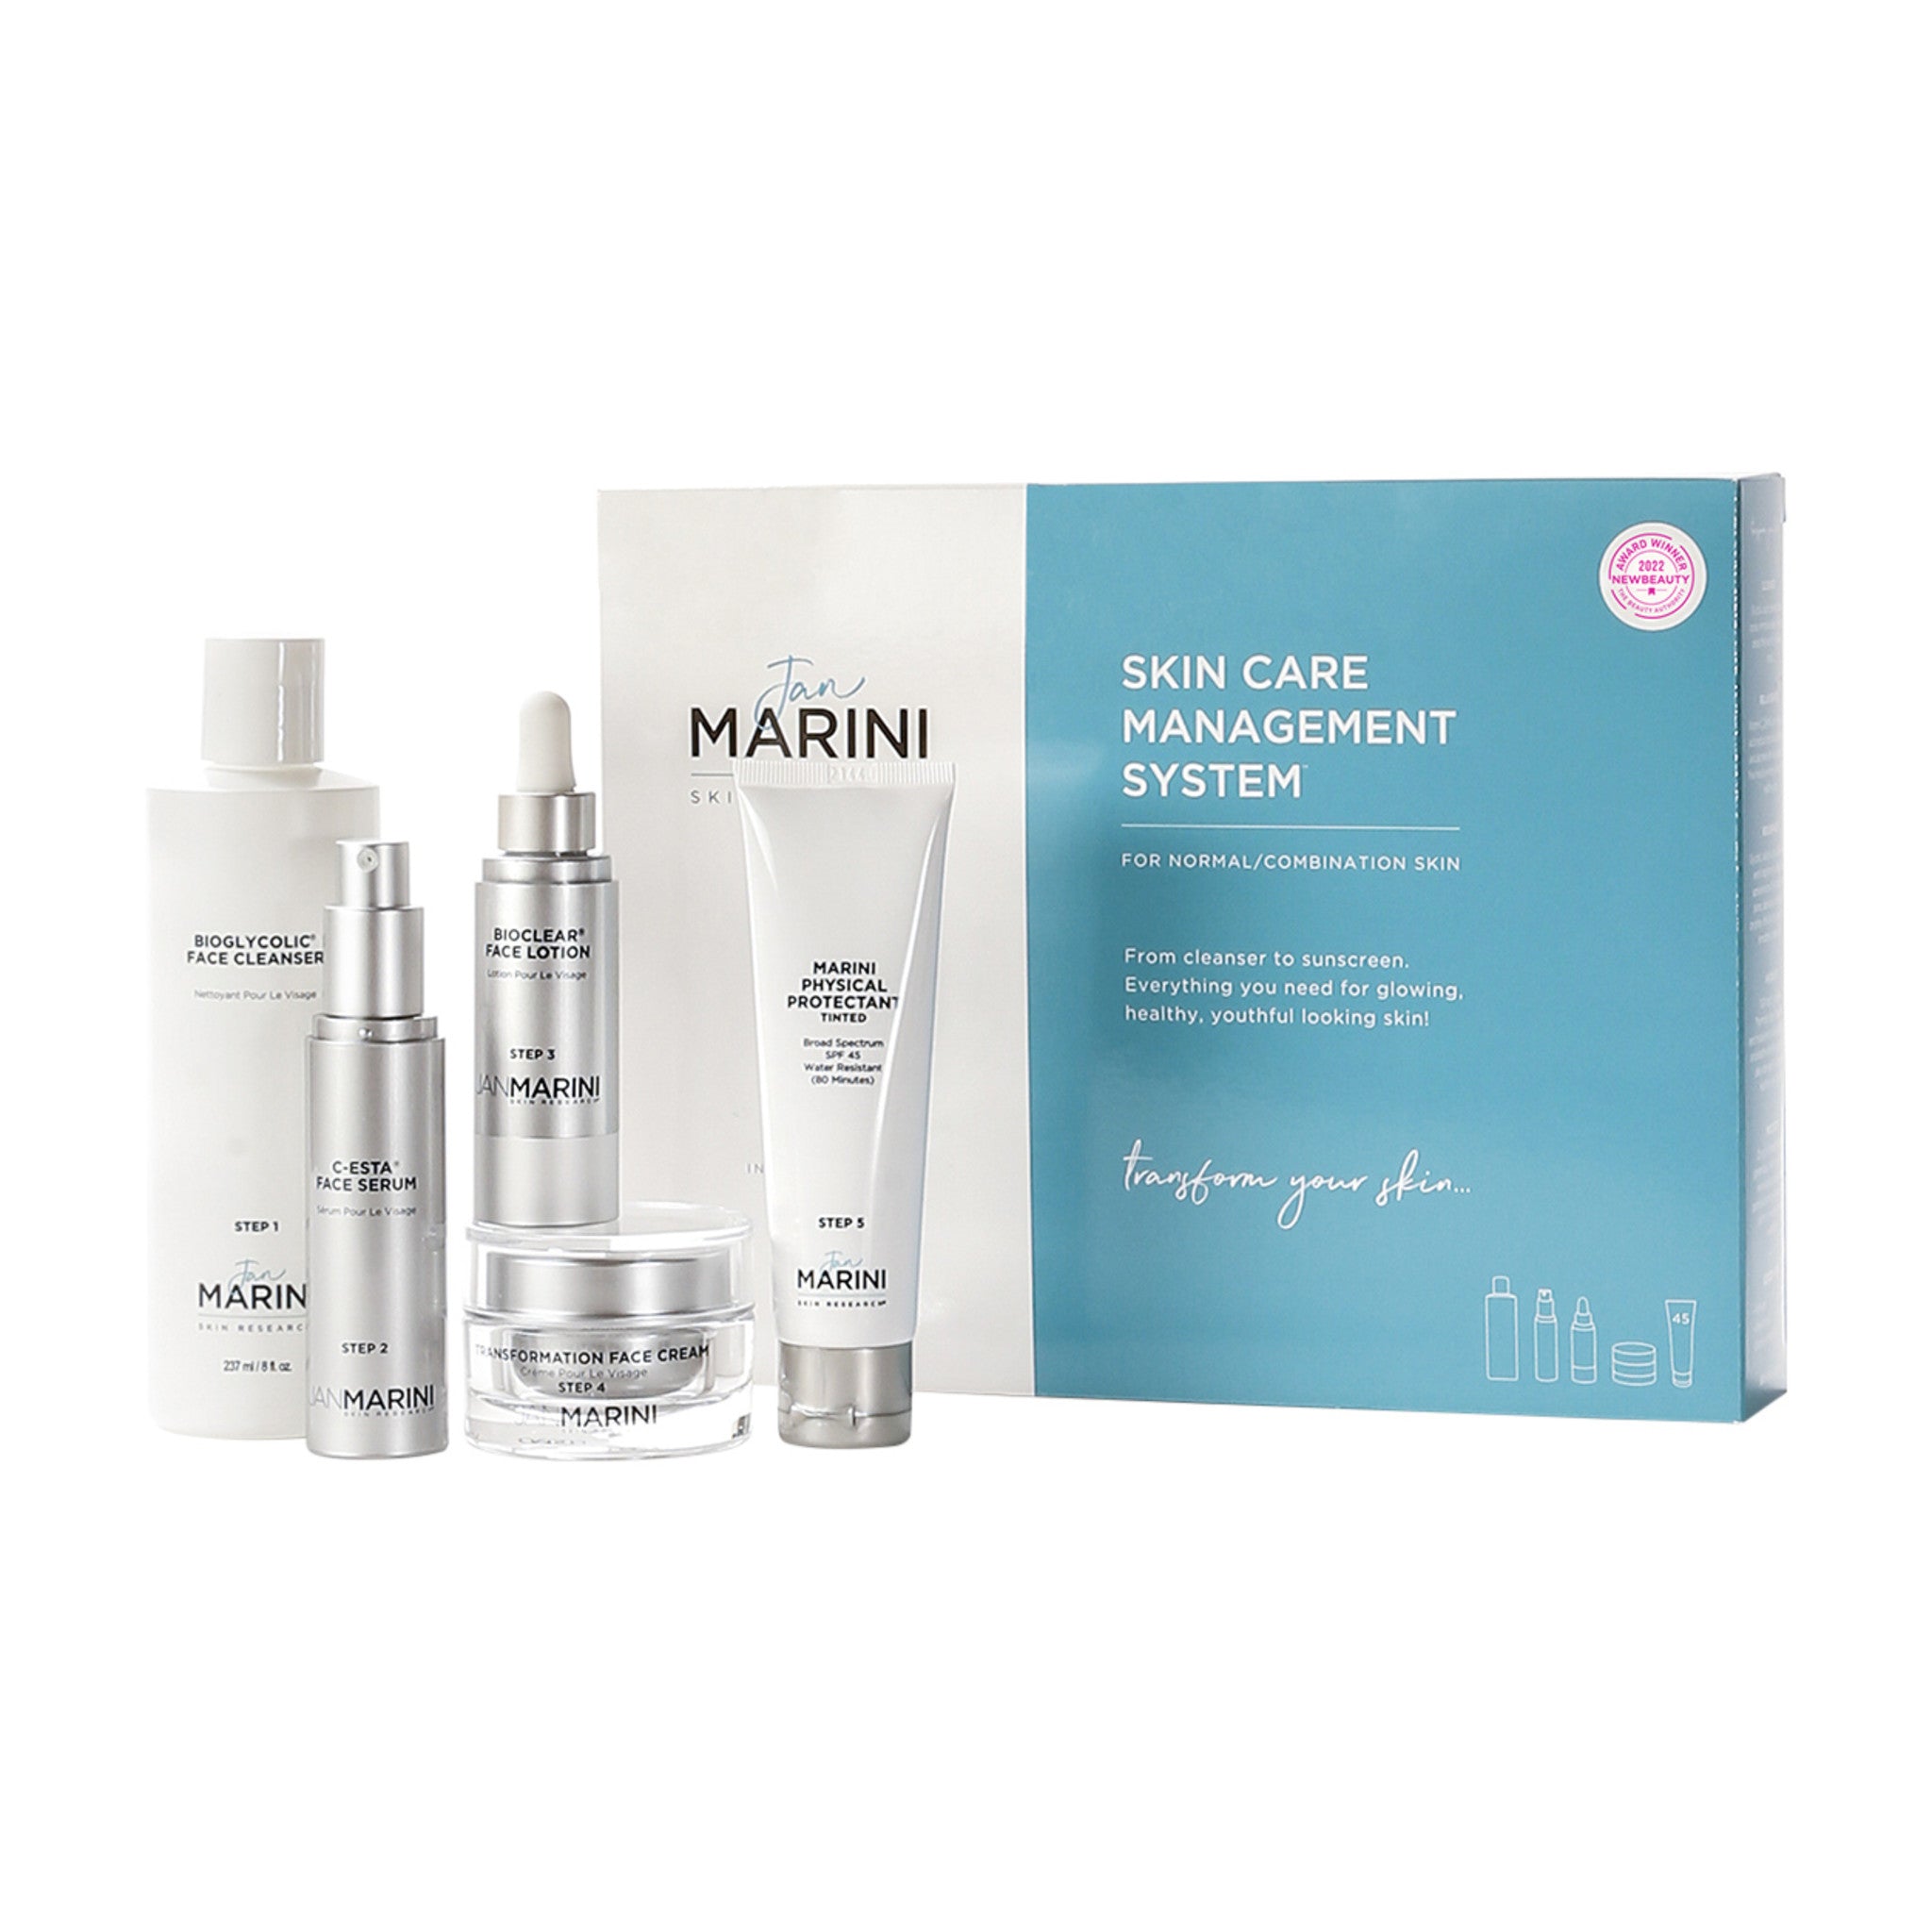 Skin Care Management System Normal or Combination Skin with Marini Physical Protectant SPF 45 main image.